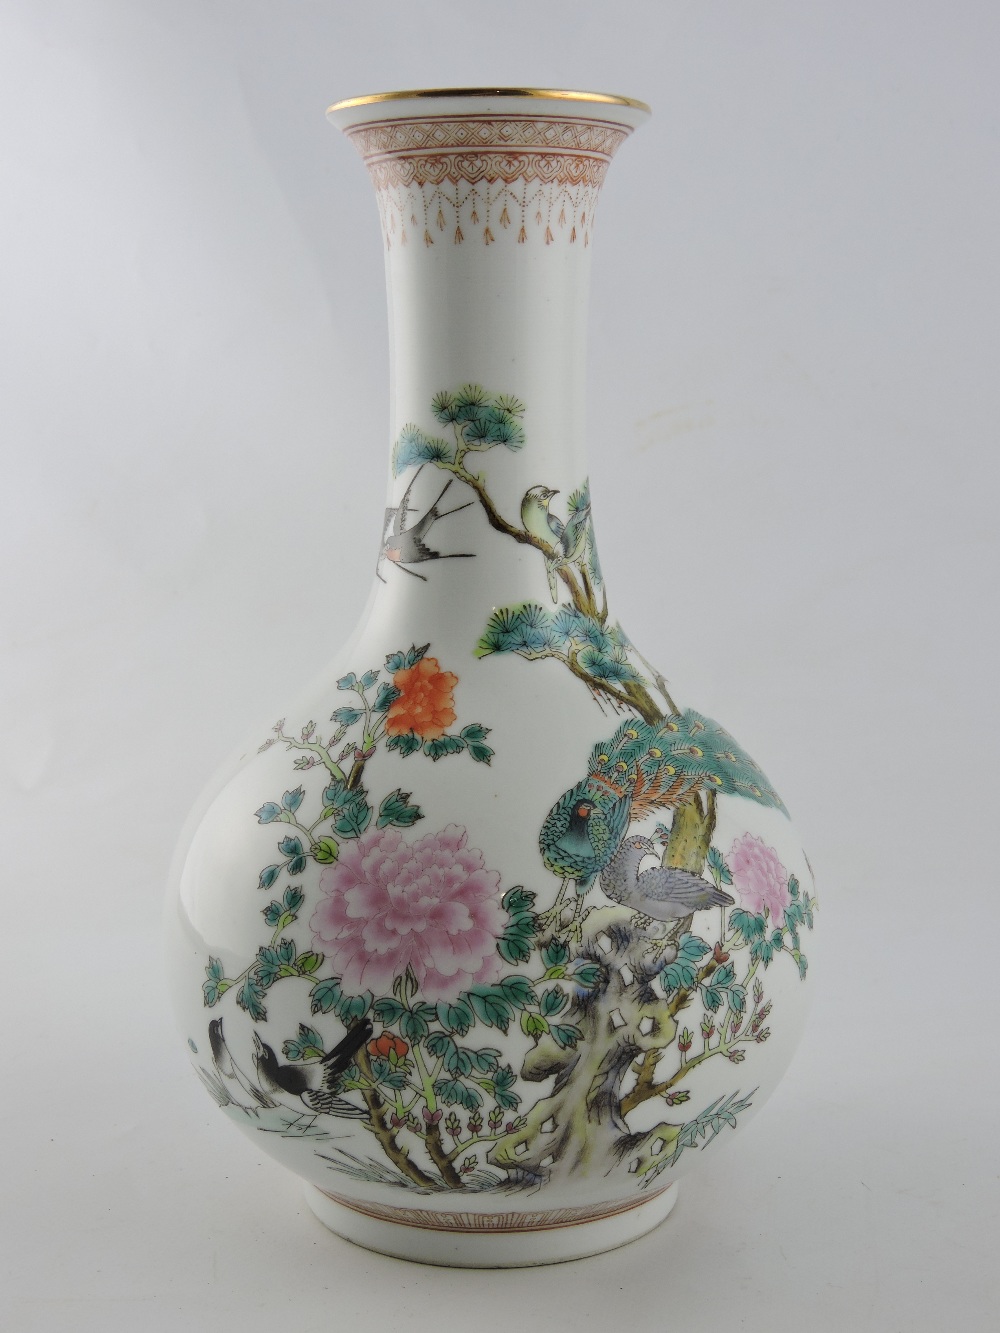 An early 20th century Chinese polychrome vase, decorated with birds and flowers, with six